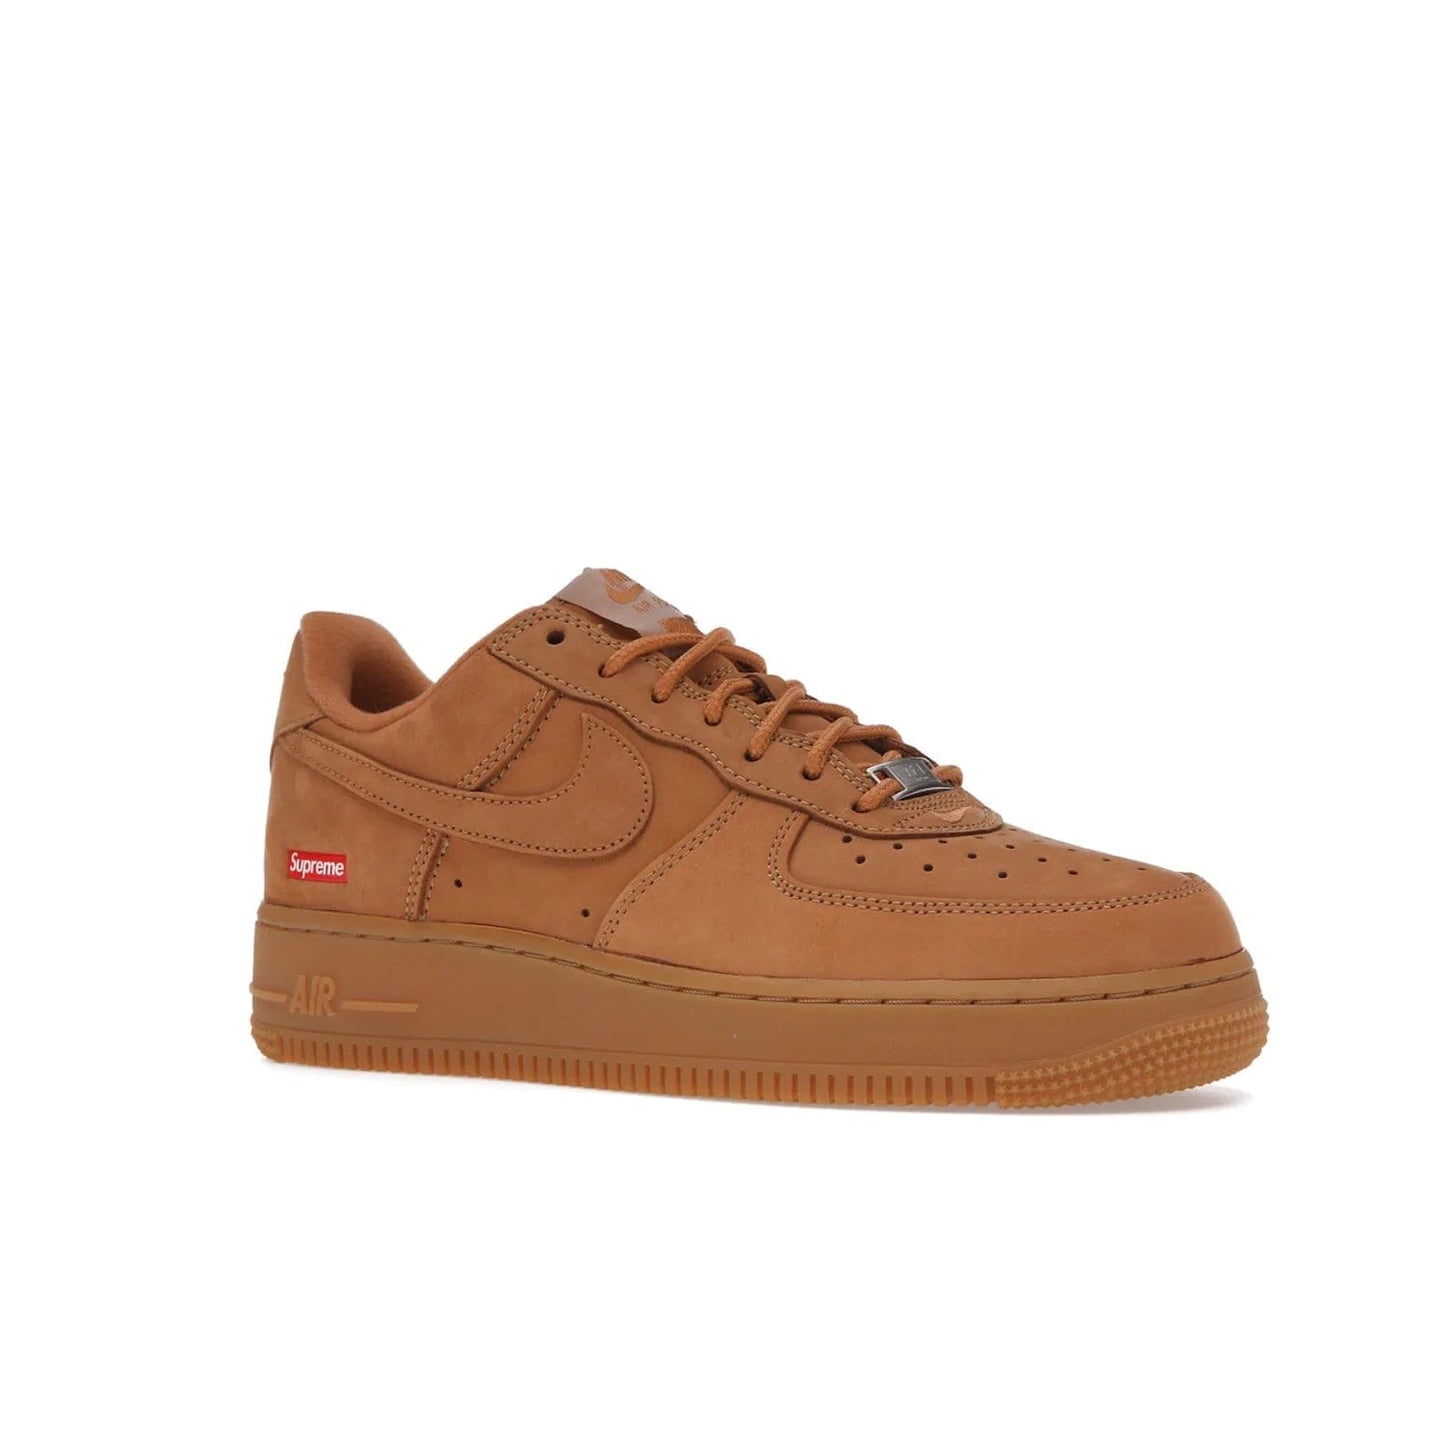 Nike Air Force 1 Low SP Supreme Wheat - Image 4 - Only at www.BallersClubKickz.com - A luxe Flax Durabuck upper and Supreme Box Logo insignias on the lateral heels make the Nike Air Force 1 Low SP Supreme Wheat a stylish lifestyle shoe. Matching Flax Air sole adds a classic touch to this collaboration between Nike and Supreme. Make a statement with this edition of the classic Air Force 1 Low.